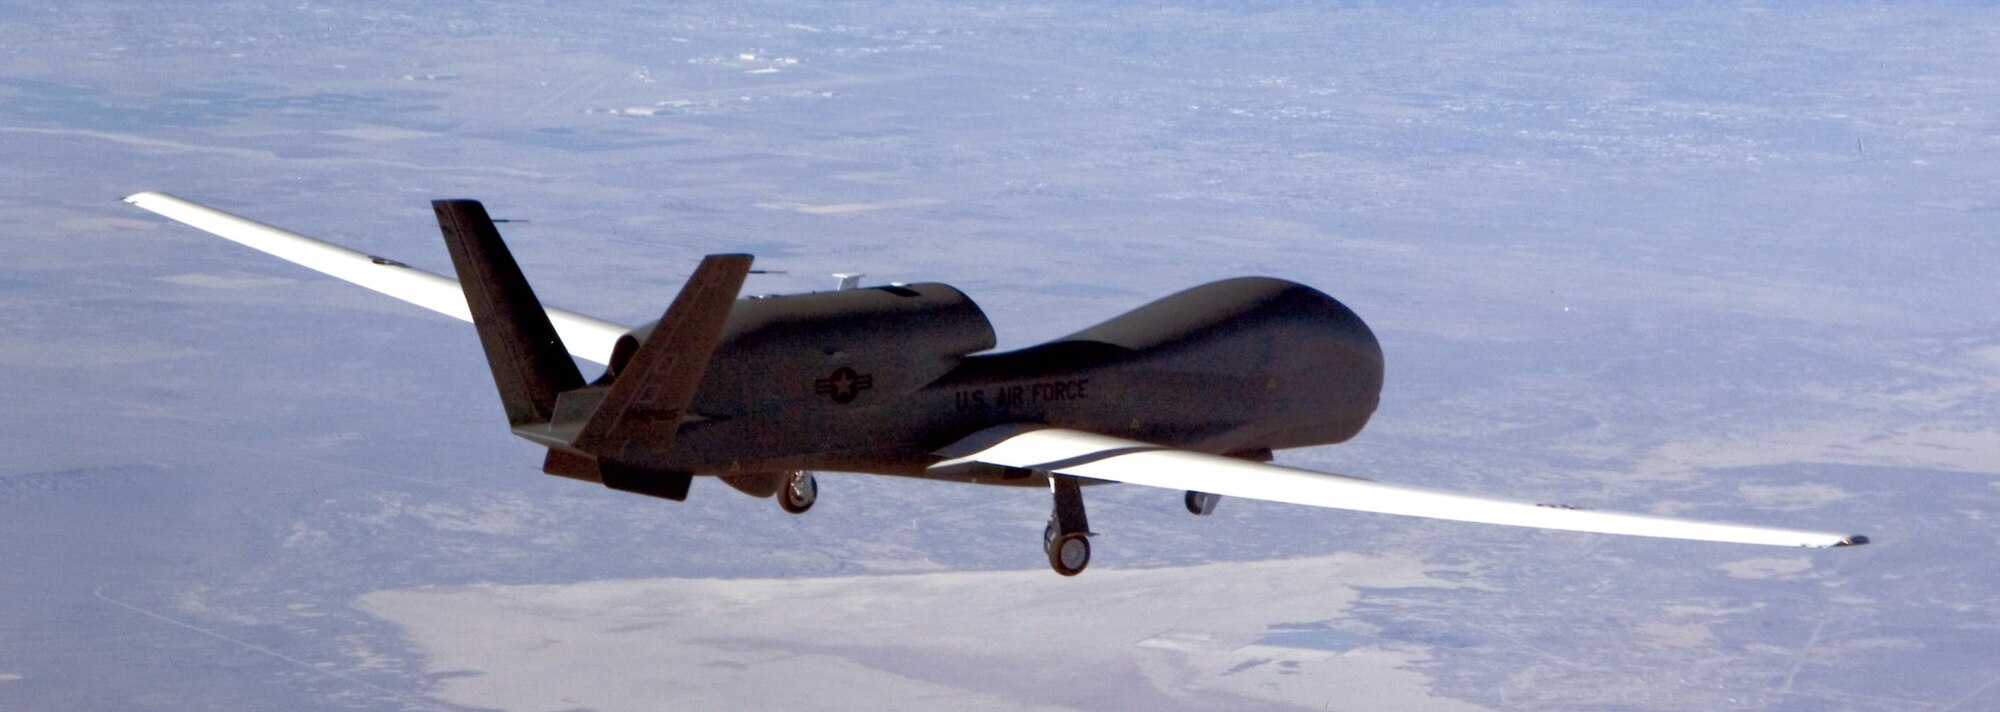 An RQ-4 Global Hawk soars through the air in support of the Global War on Terror. More than 75 percent of the 30,000 total flying hours the RQ-4 has registered has been in support of the GWOT. (Courtesy Photo)